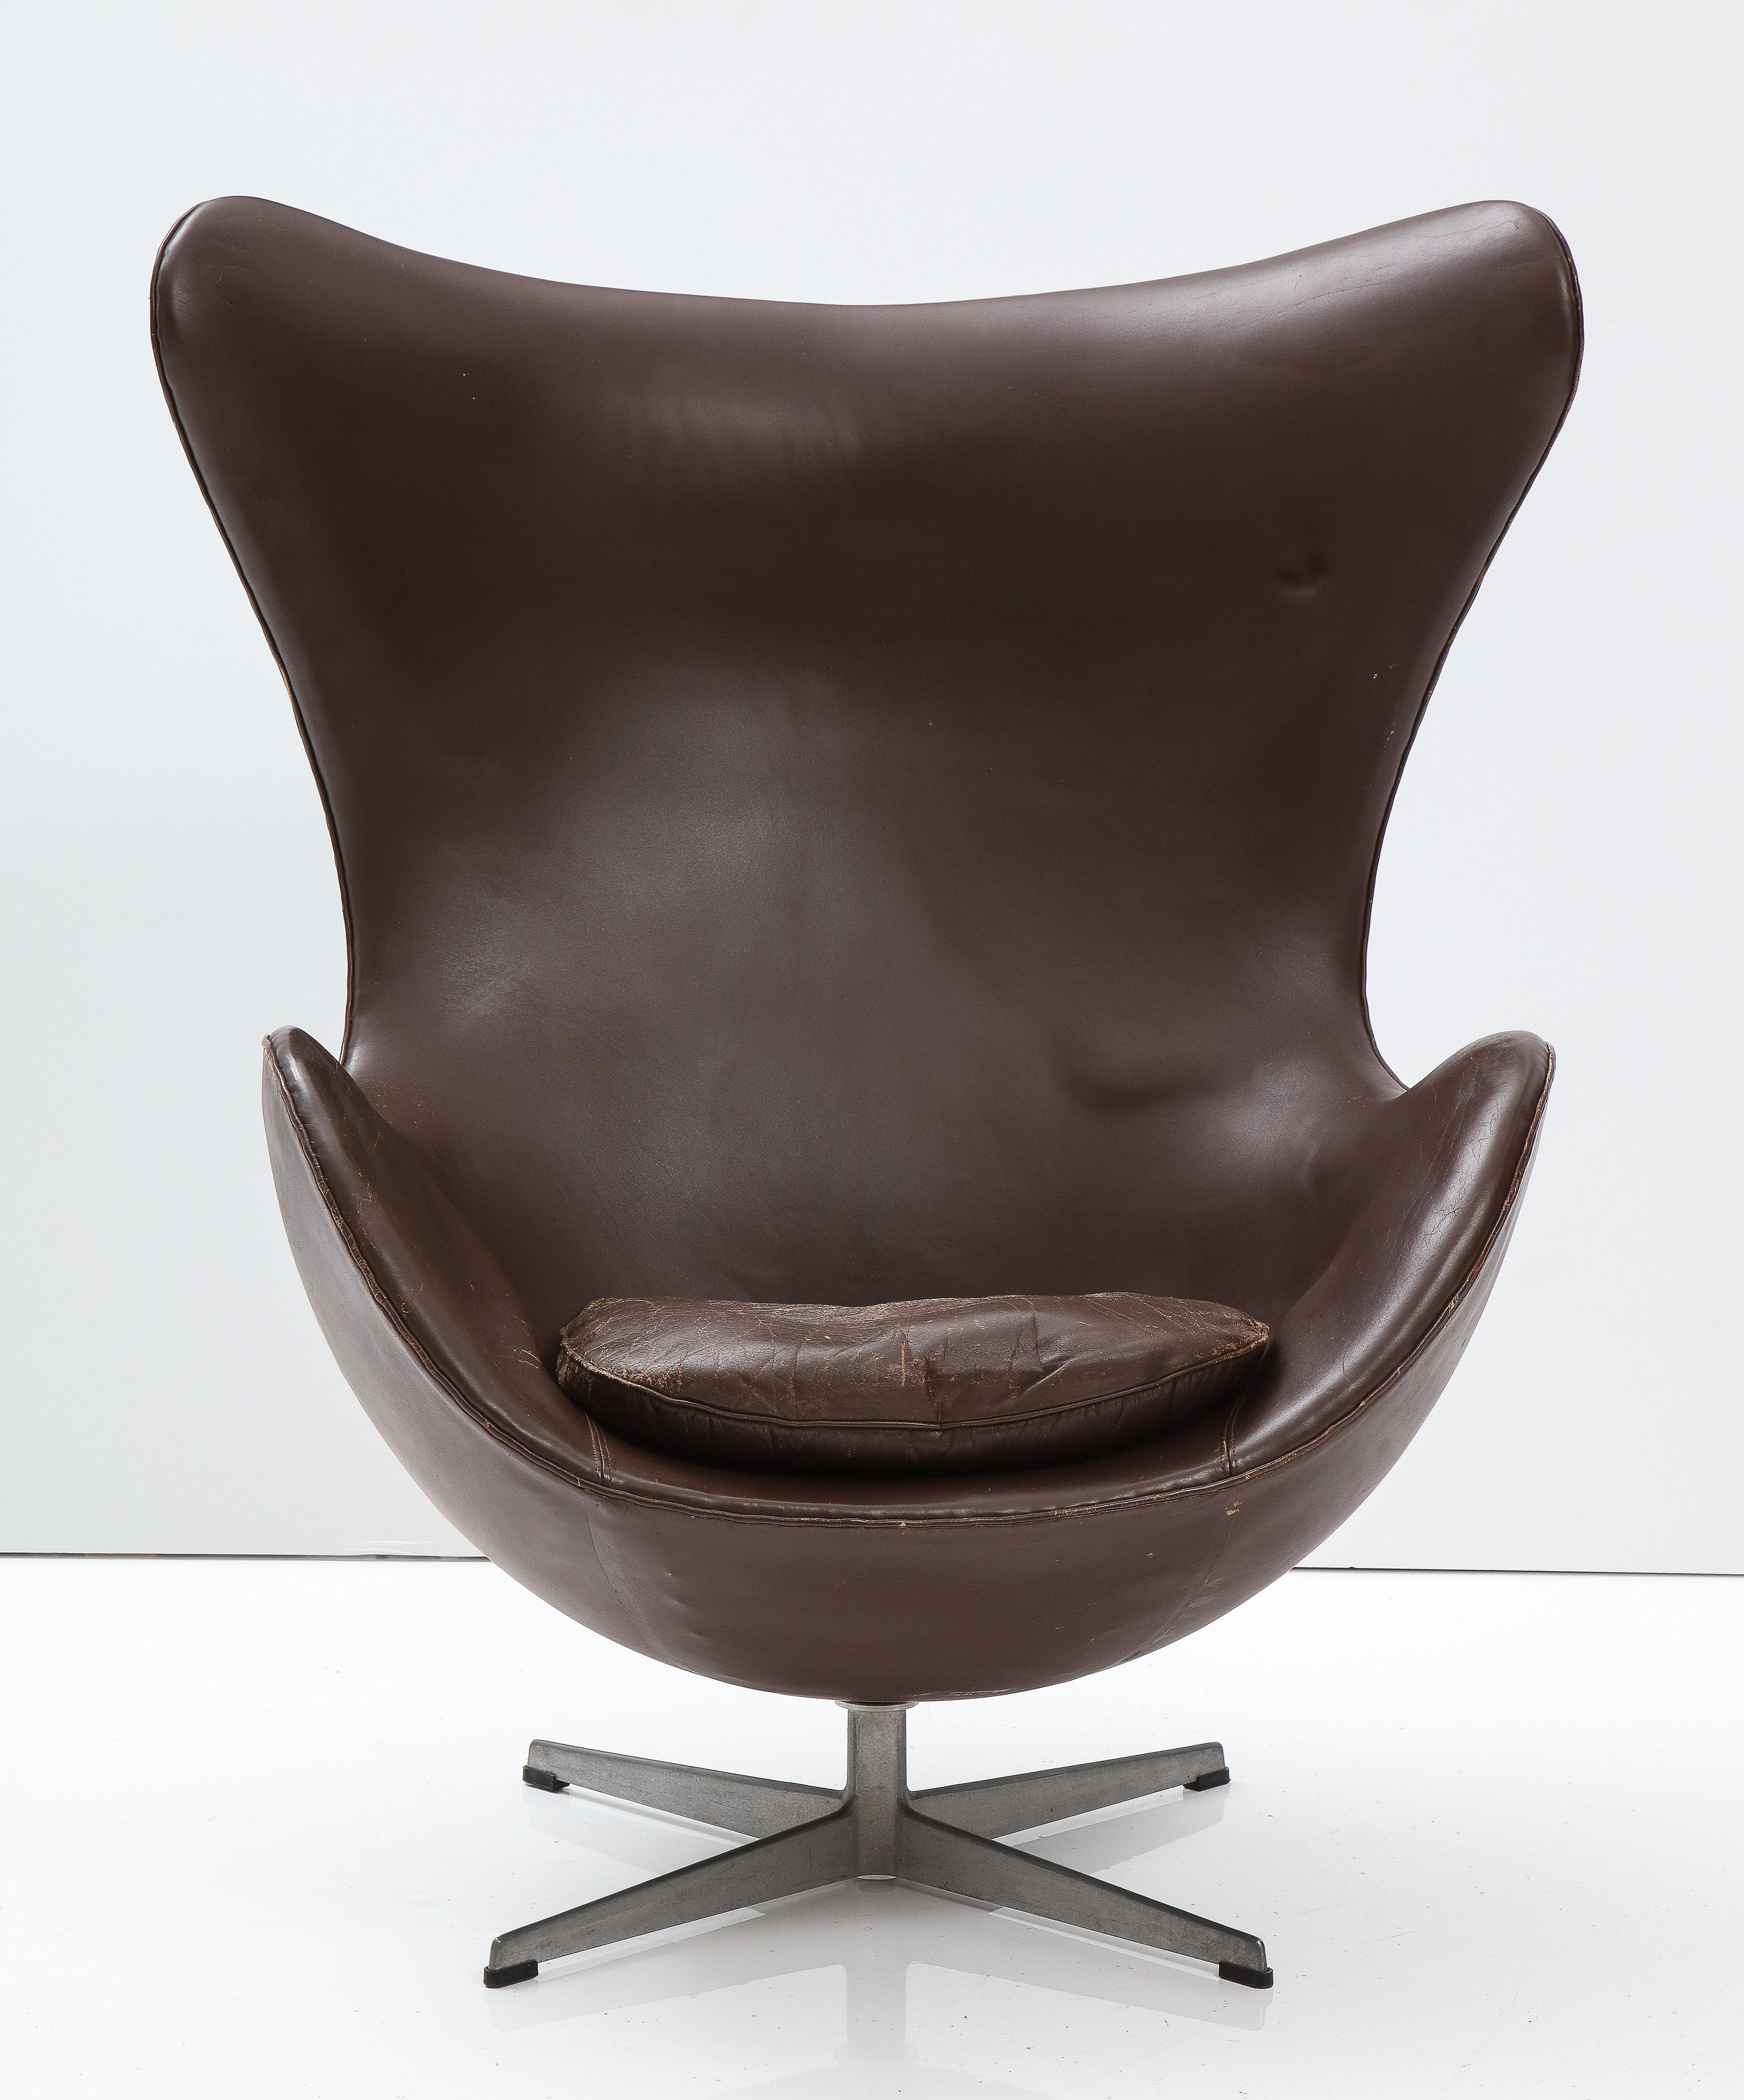 Arne Jacobson 'Egg' Chair and Ottoman, Original Leather for Fritz Hansen, 1976 For Sale 4